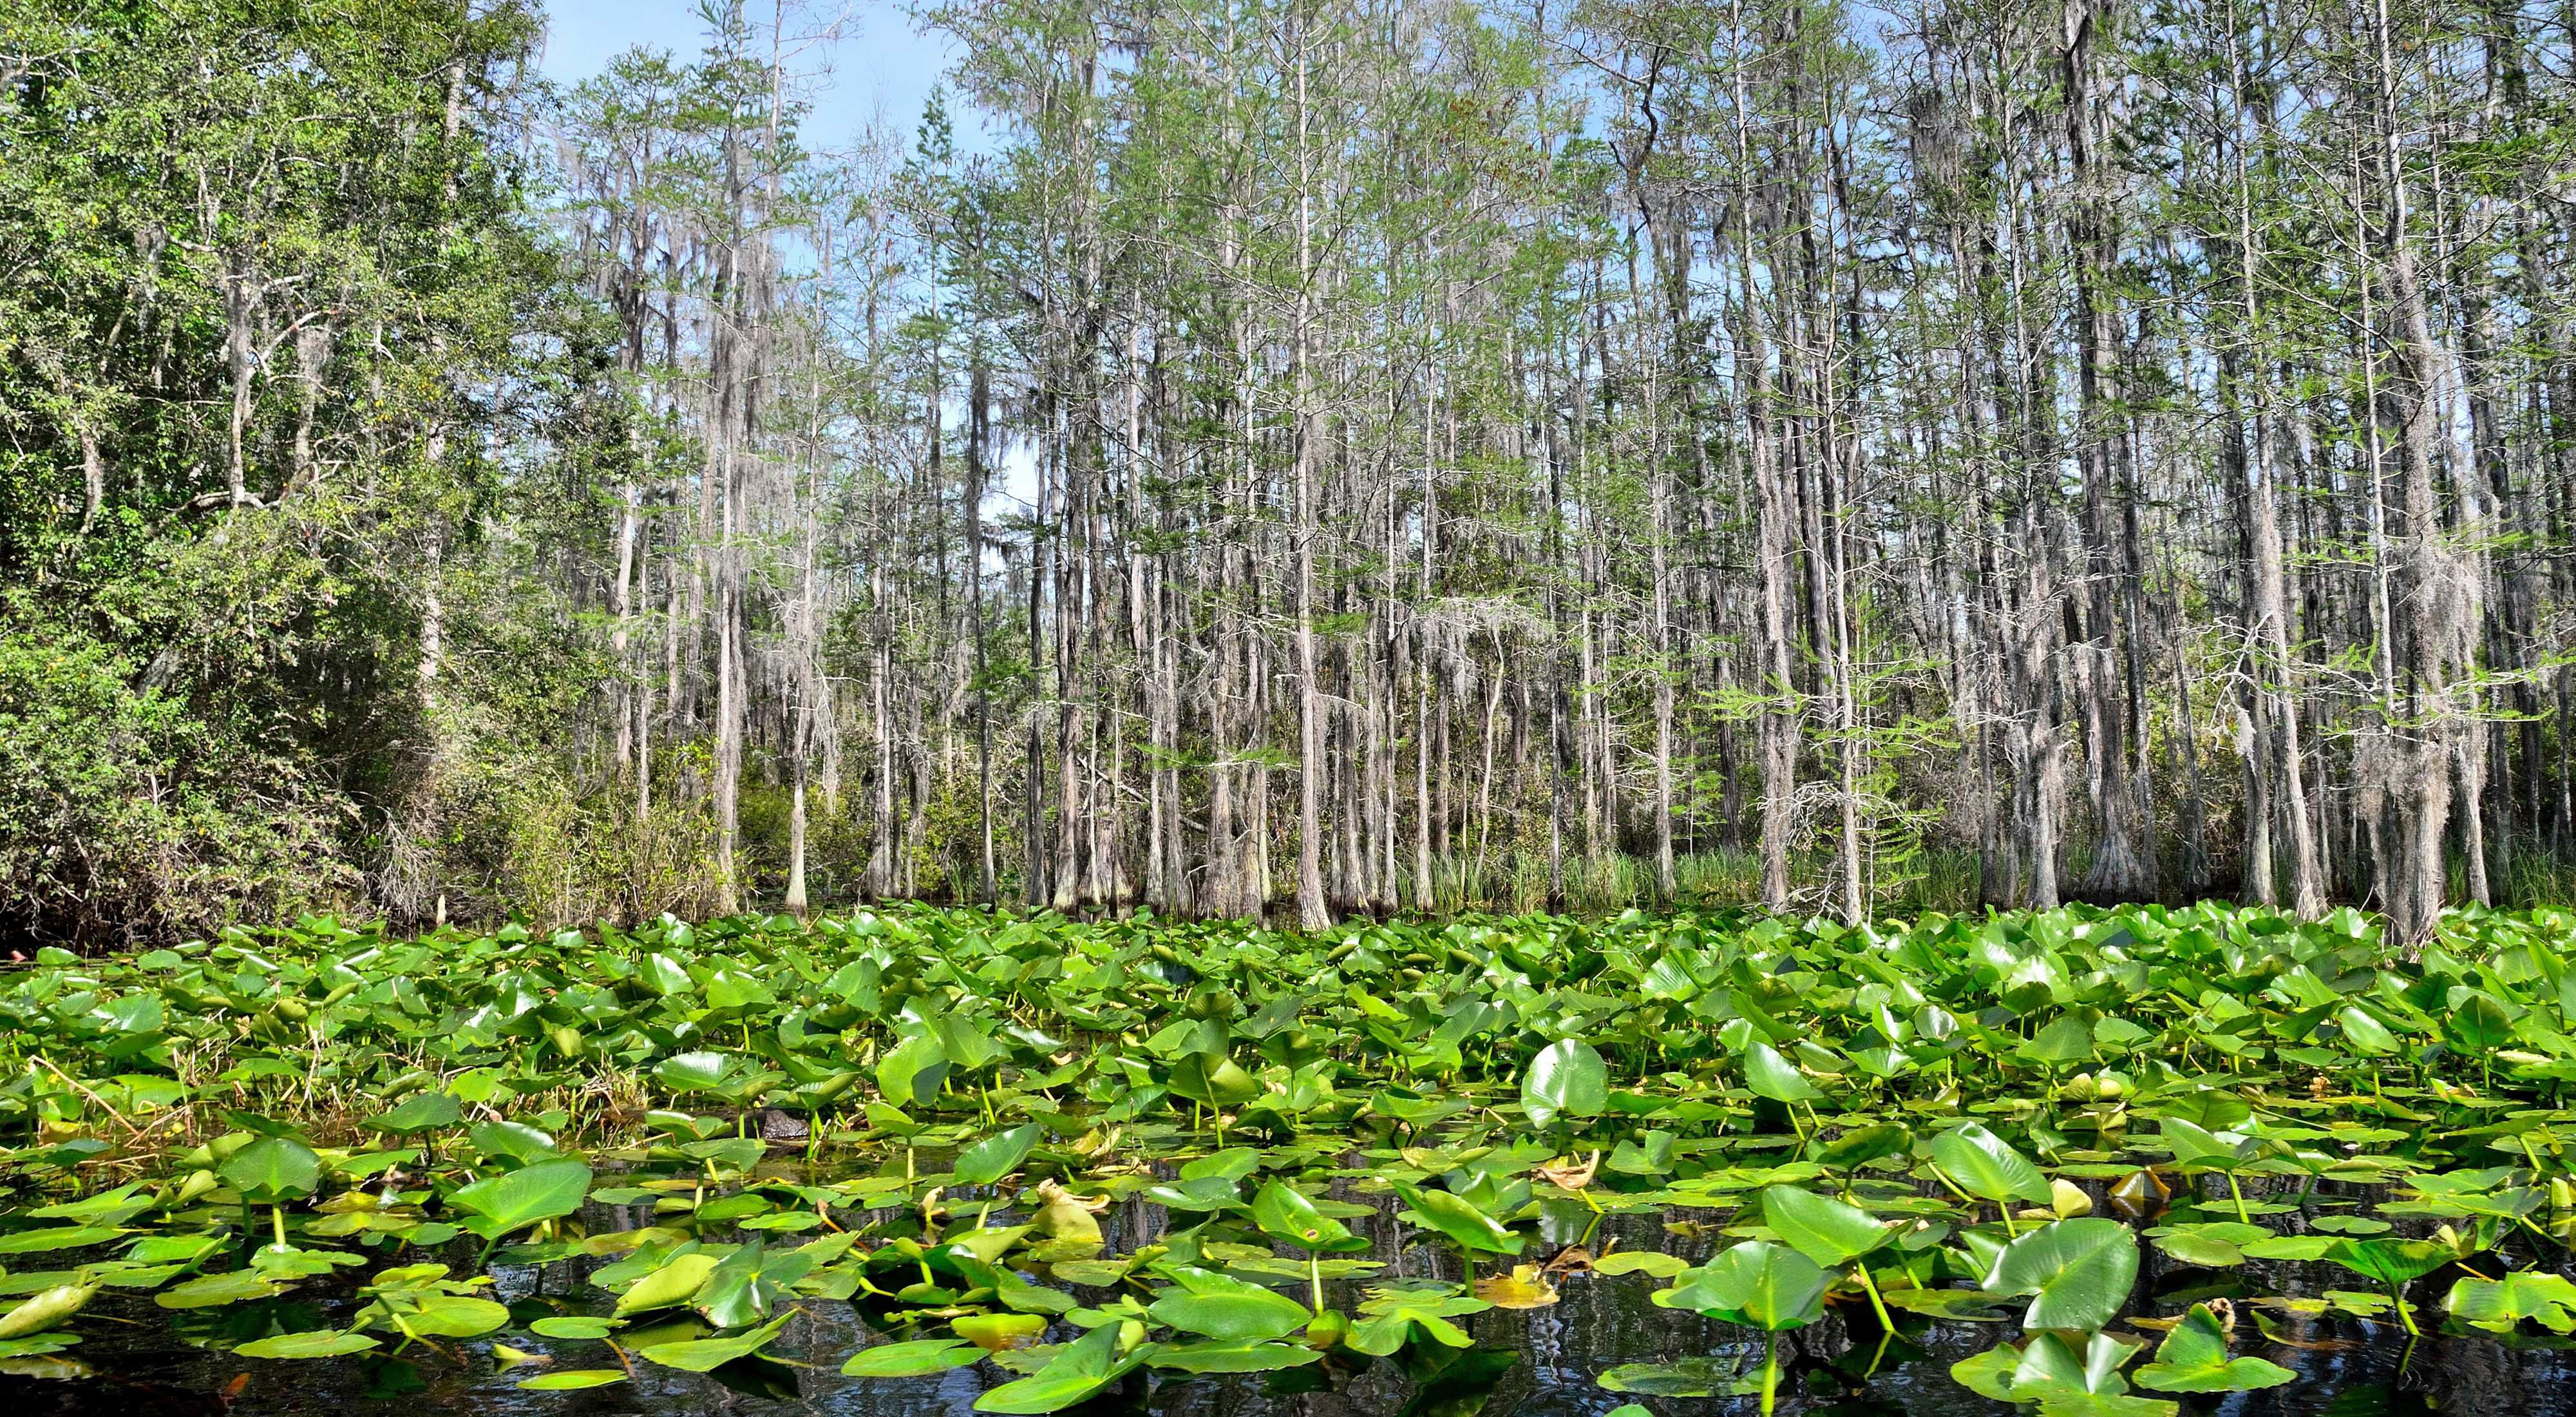 Water-level view of an abundance of bright green wetland plants with a forest of tall, thin cypress trees in the background.